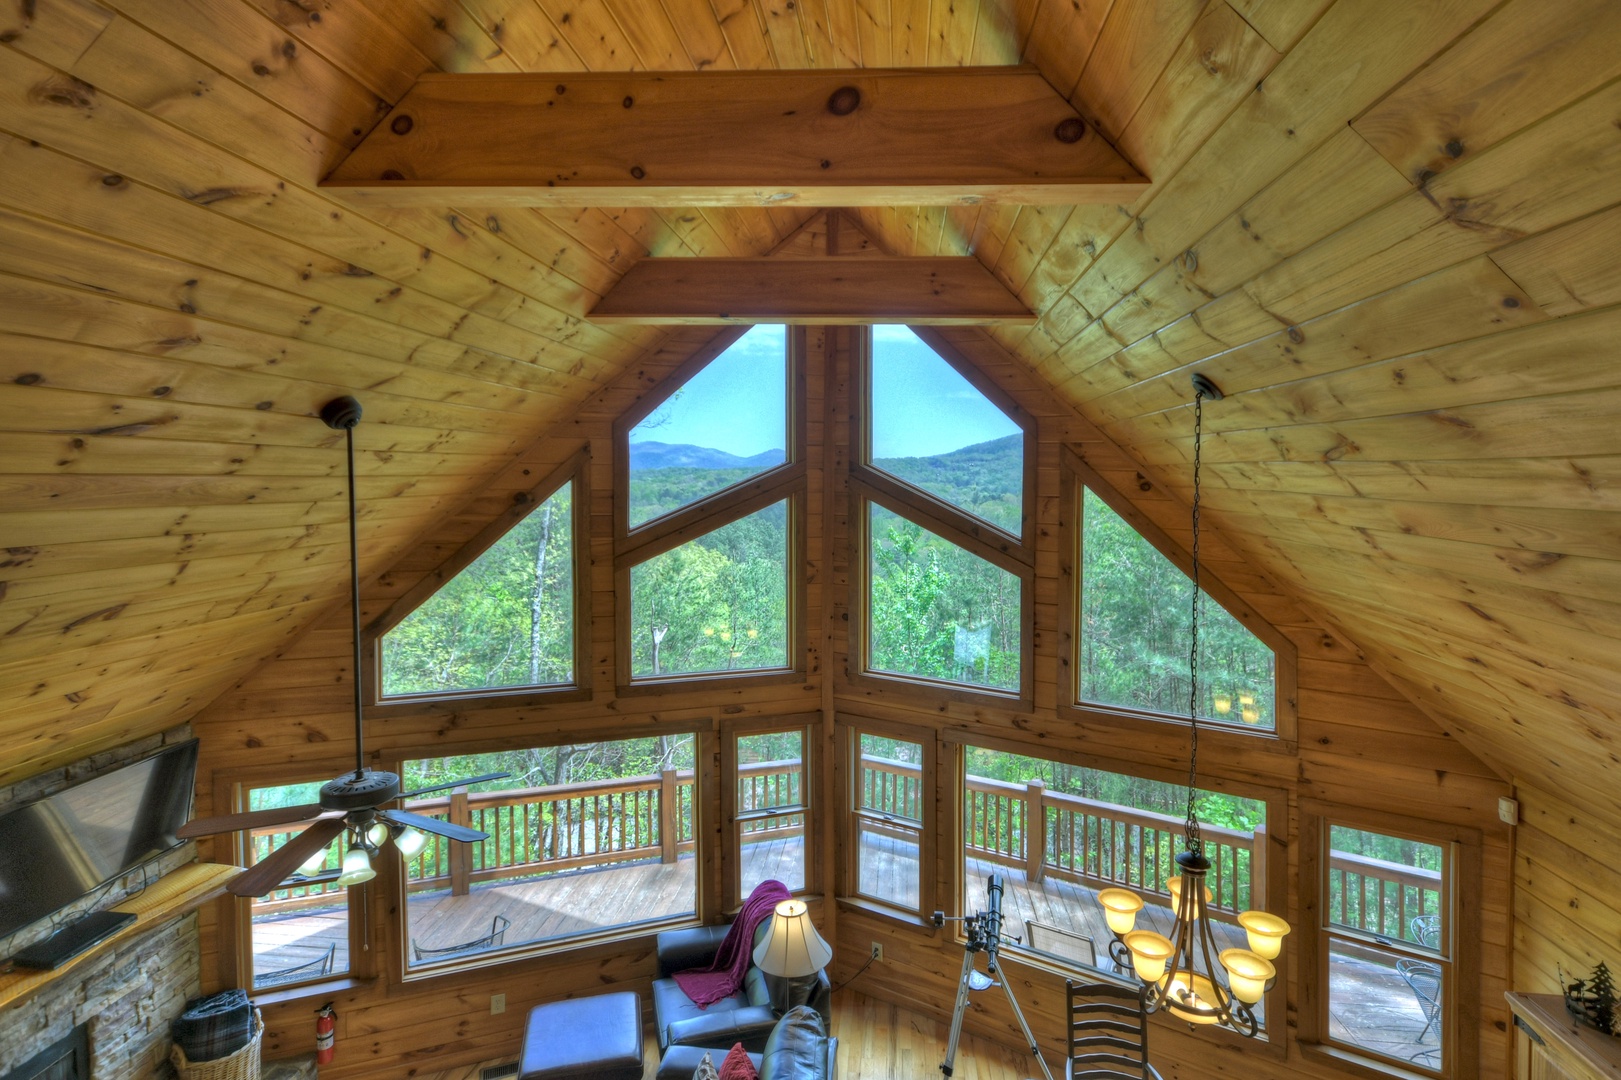 Aska Lodge-Upstairs view of the lower and upper windows showcasing the Blue Ridge mountains